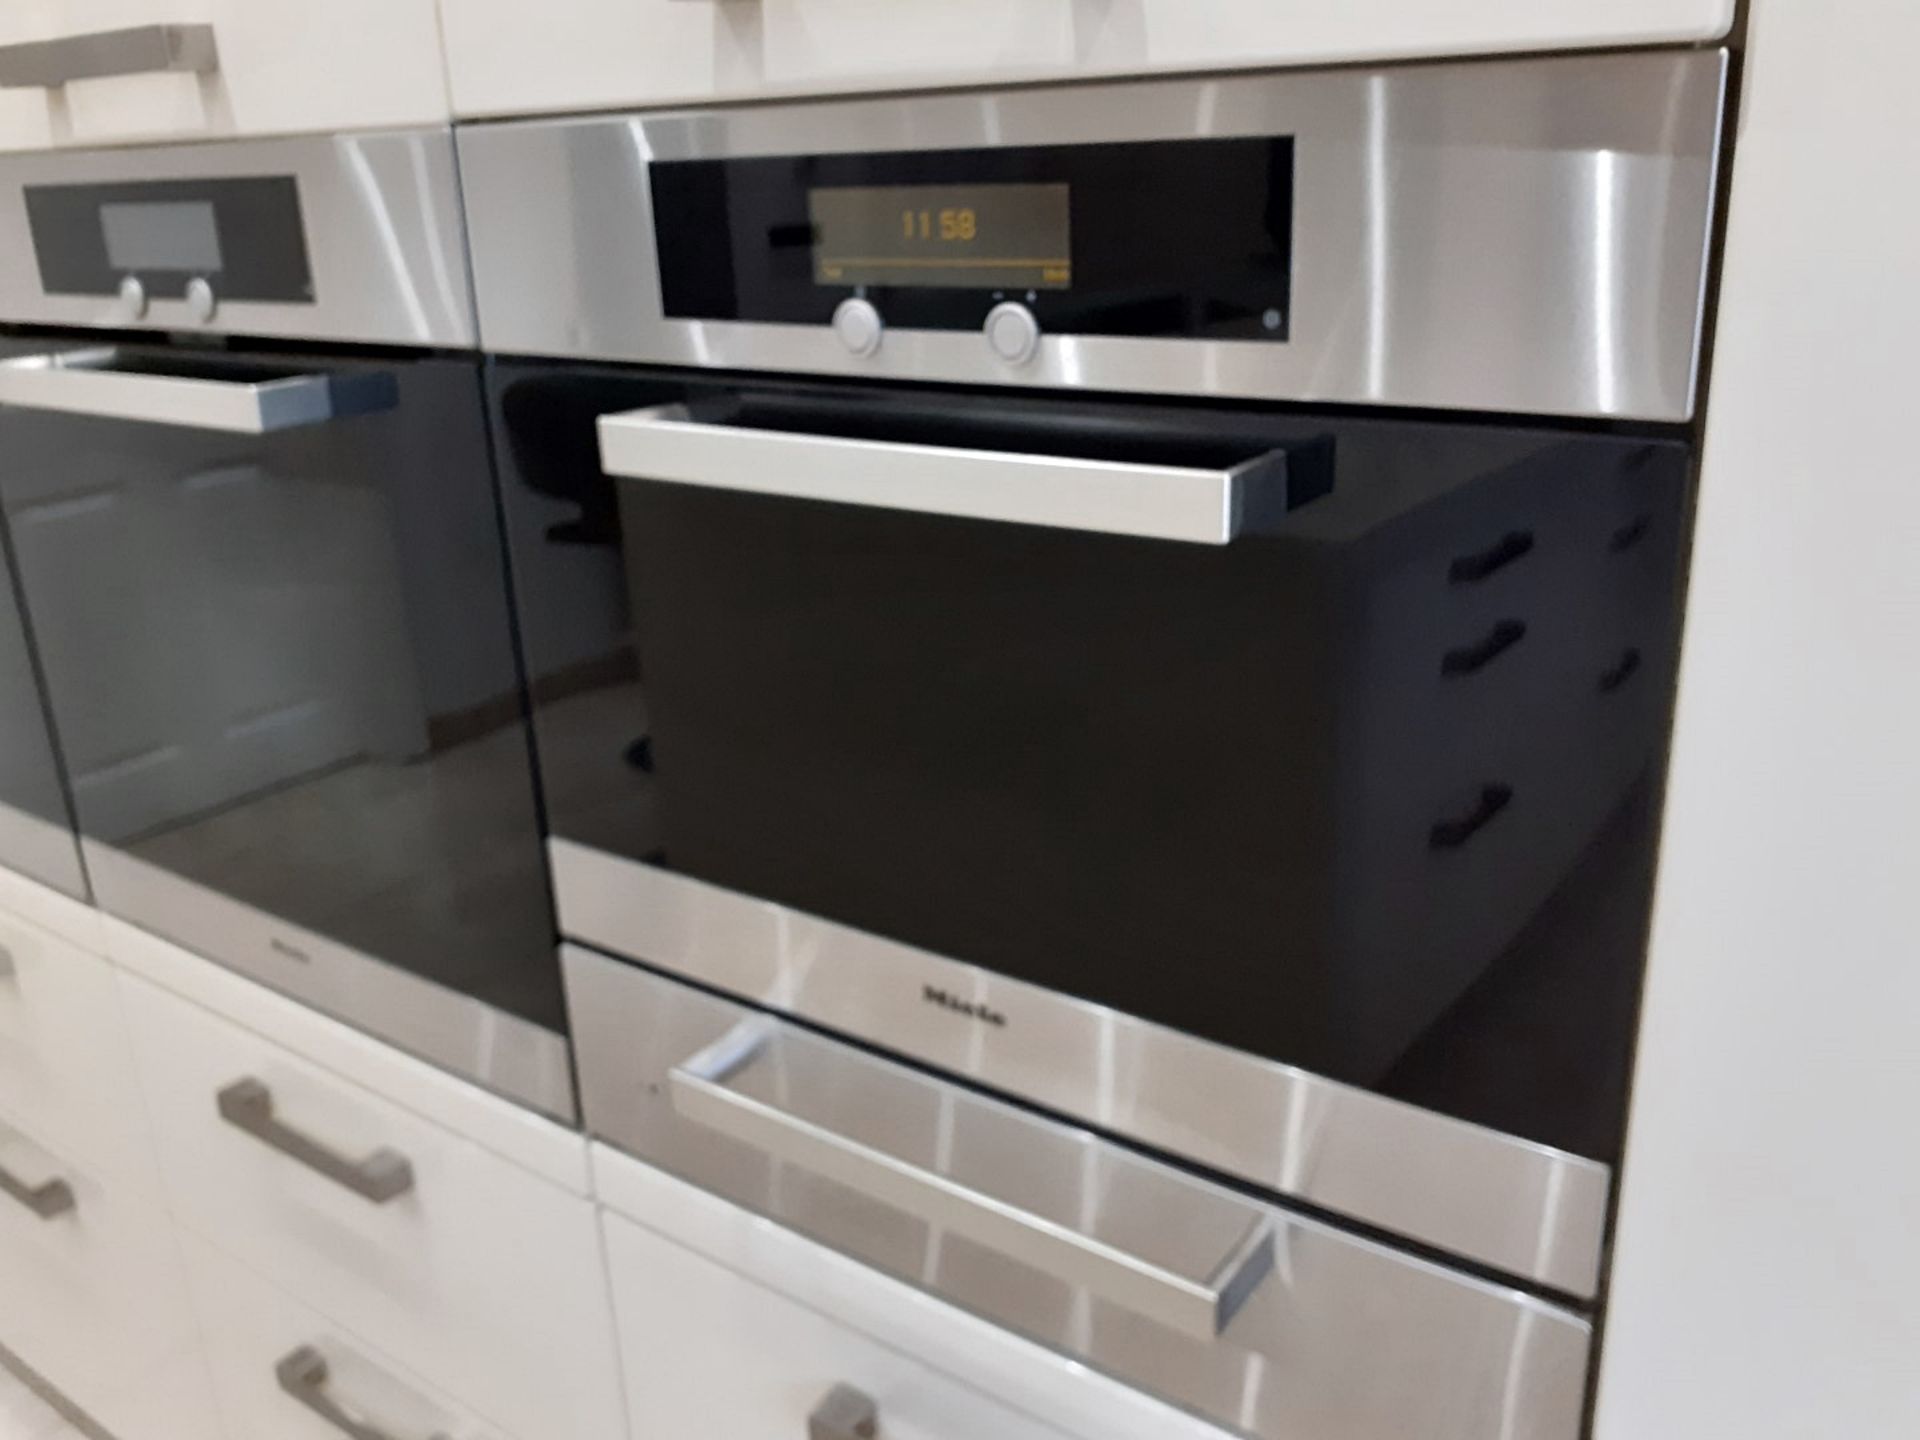 1 x ALNO Fitted Kitchen With Integrated Miele Appliances, Silestone Worktops & Breakfast Island - Image 61 of 77